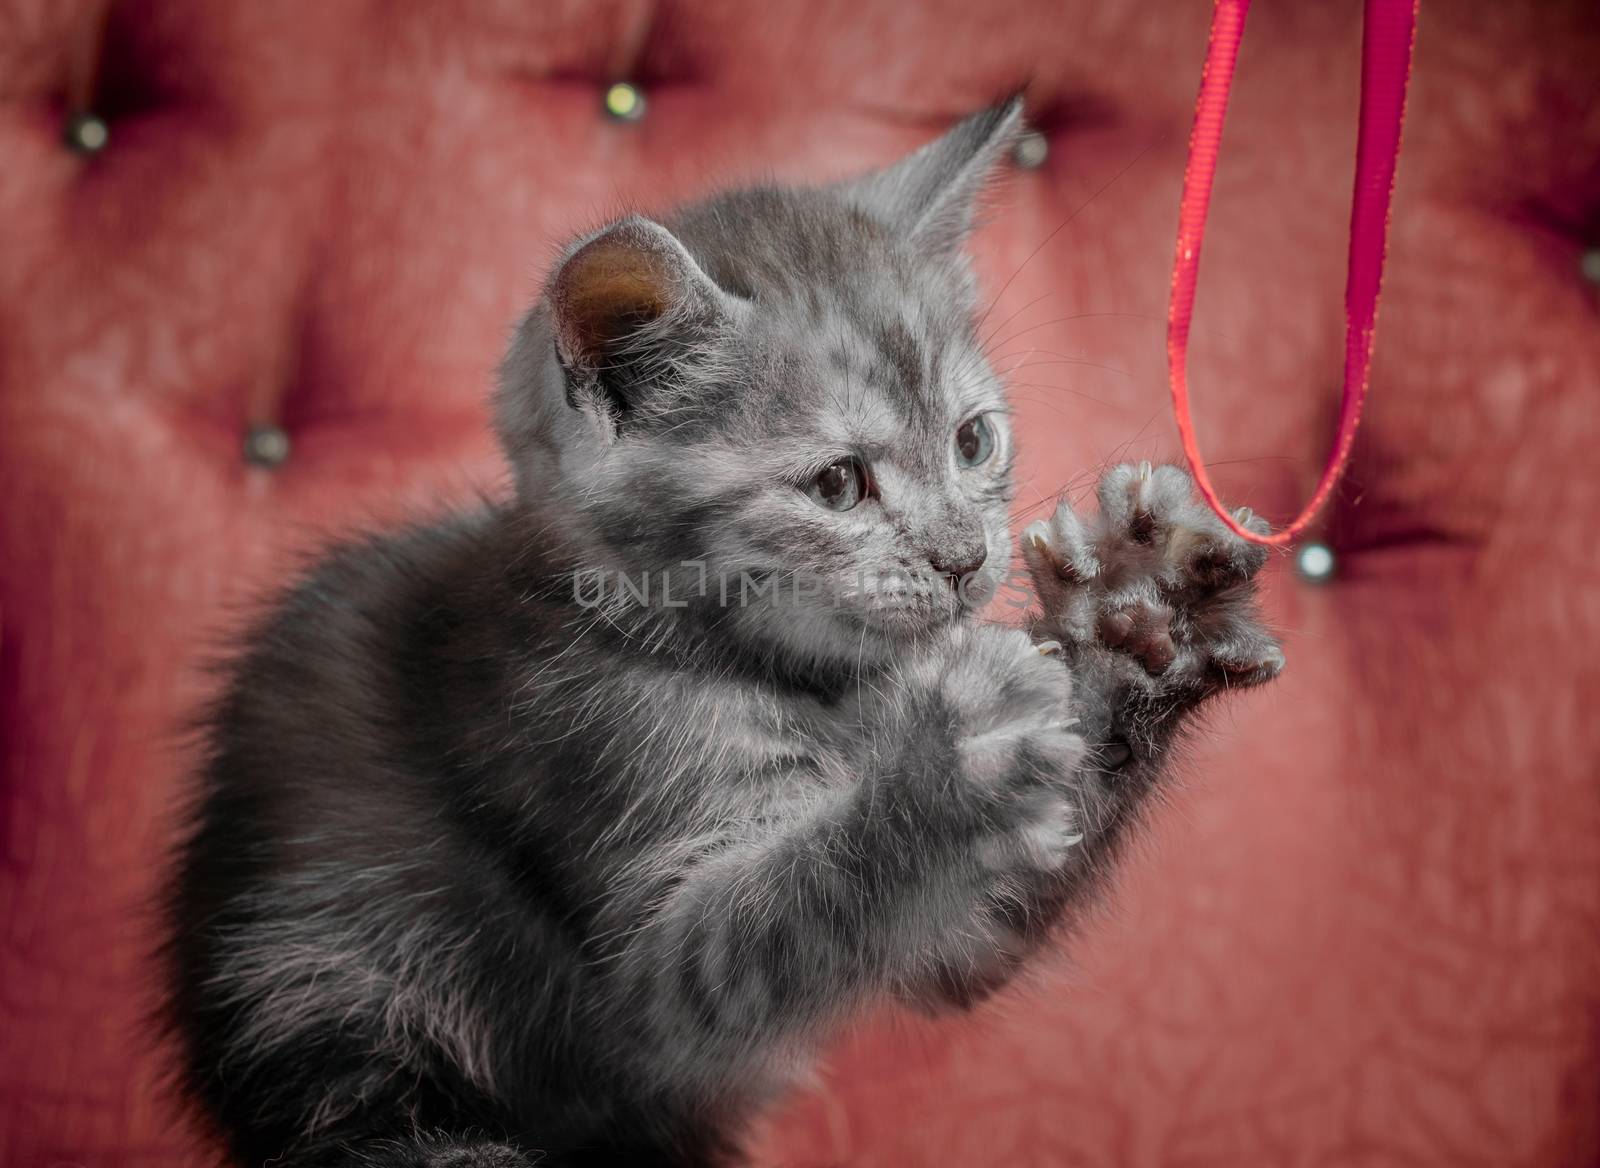 gray kitten on a red sofa plays with a ribbon by Gera8th